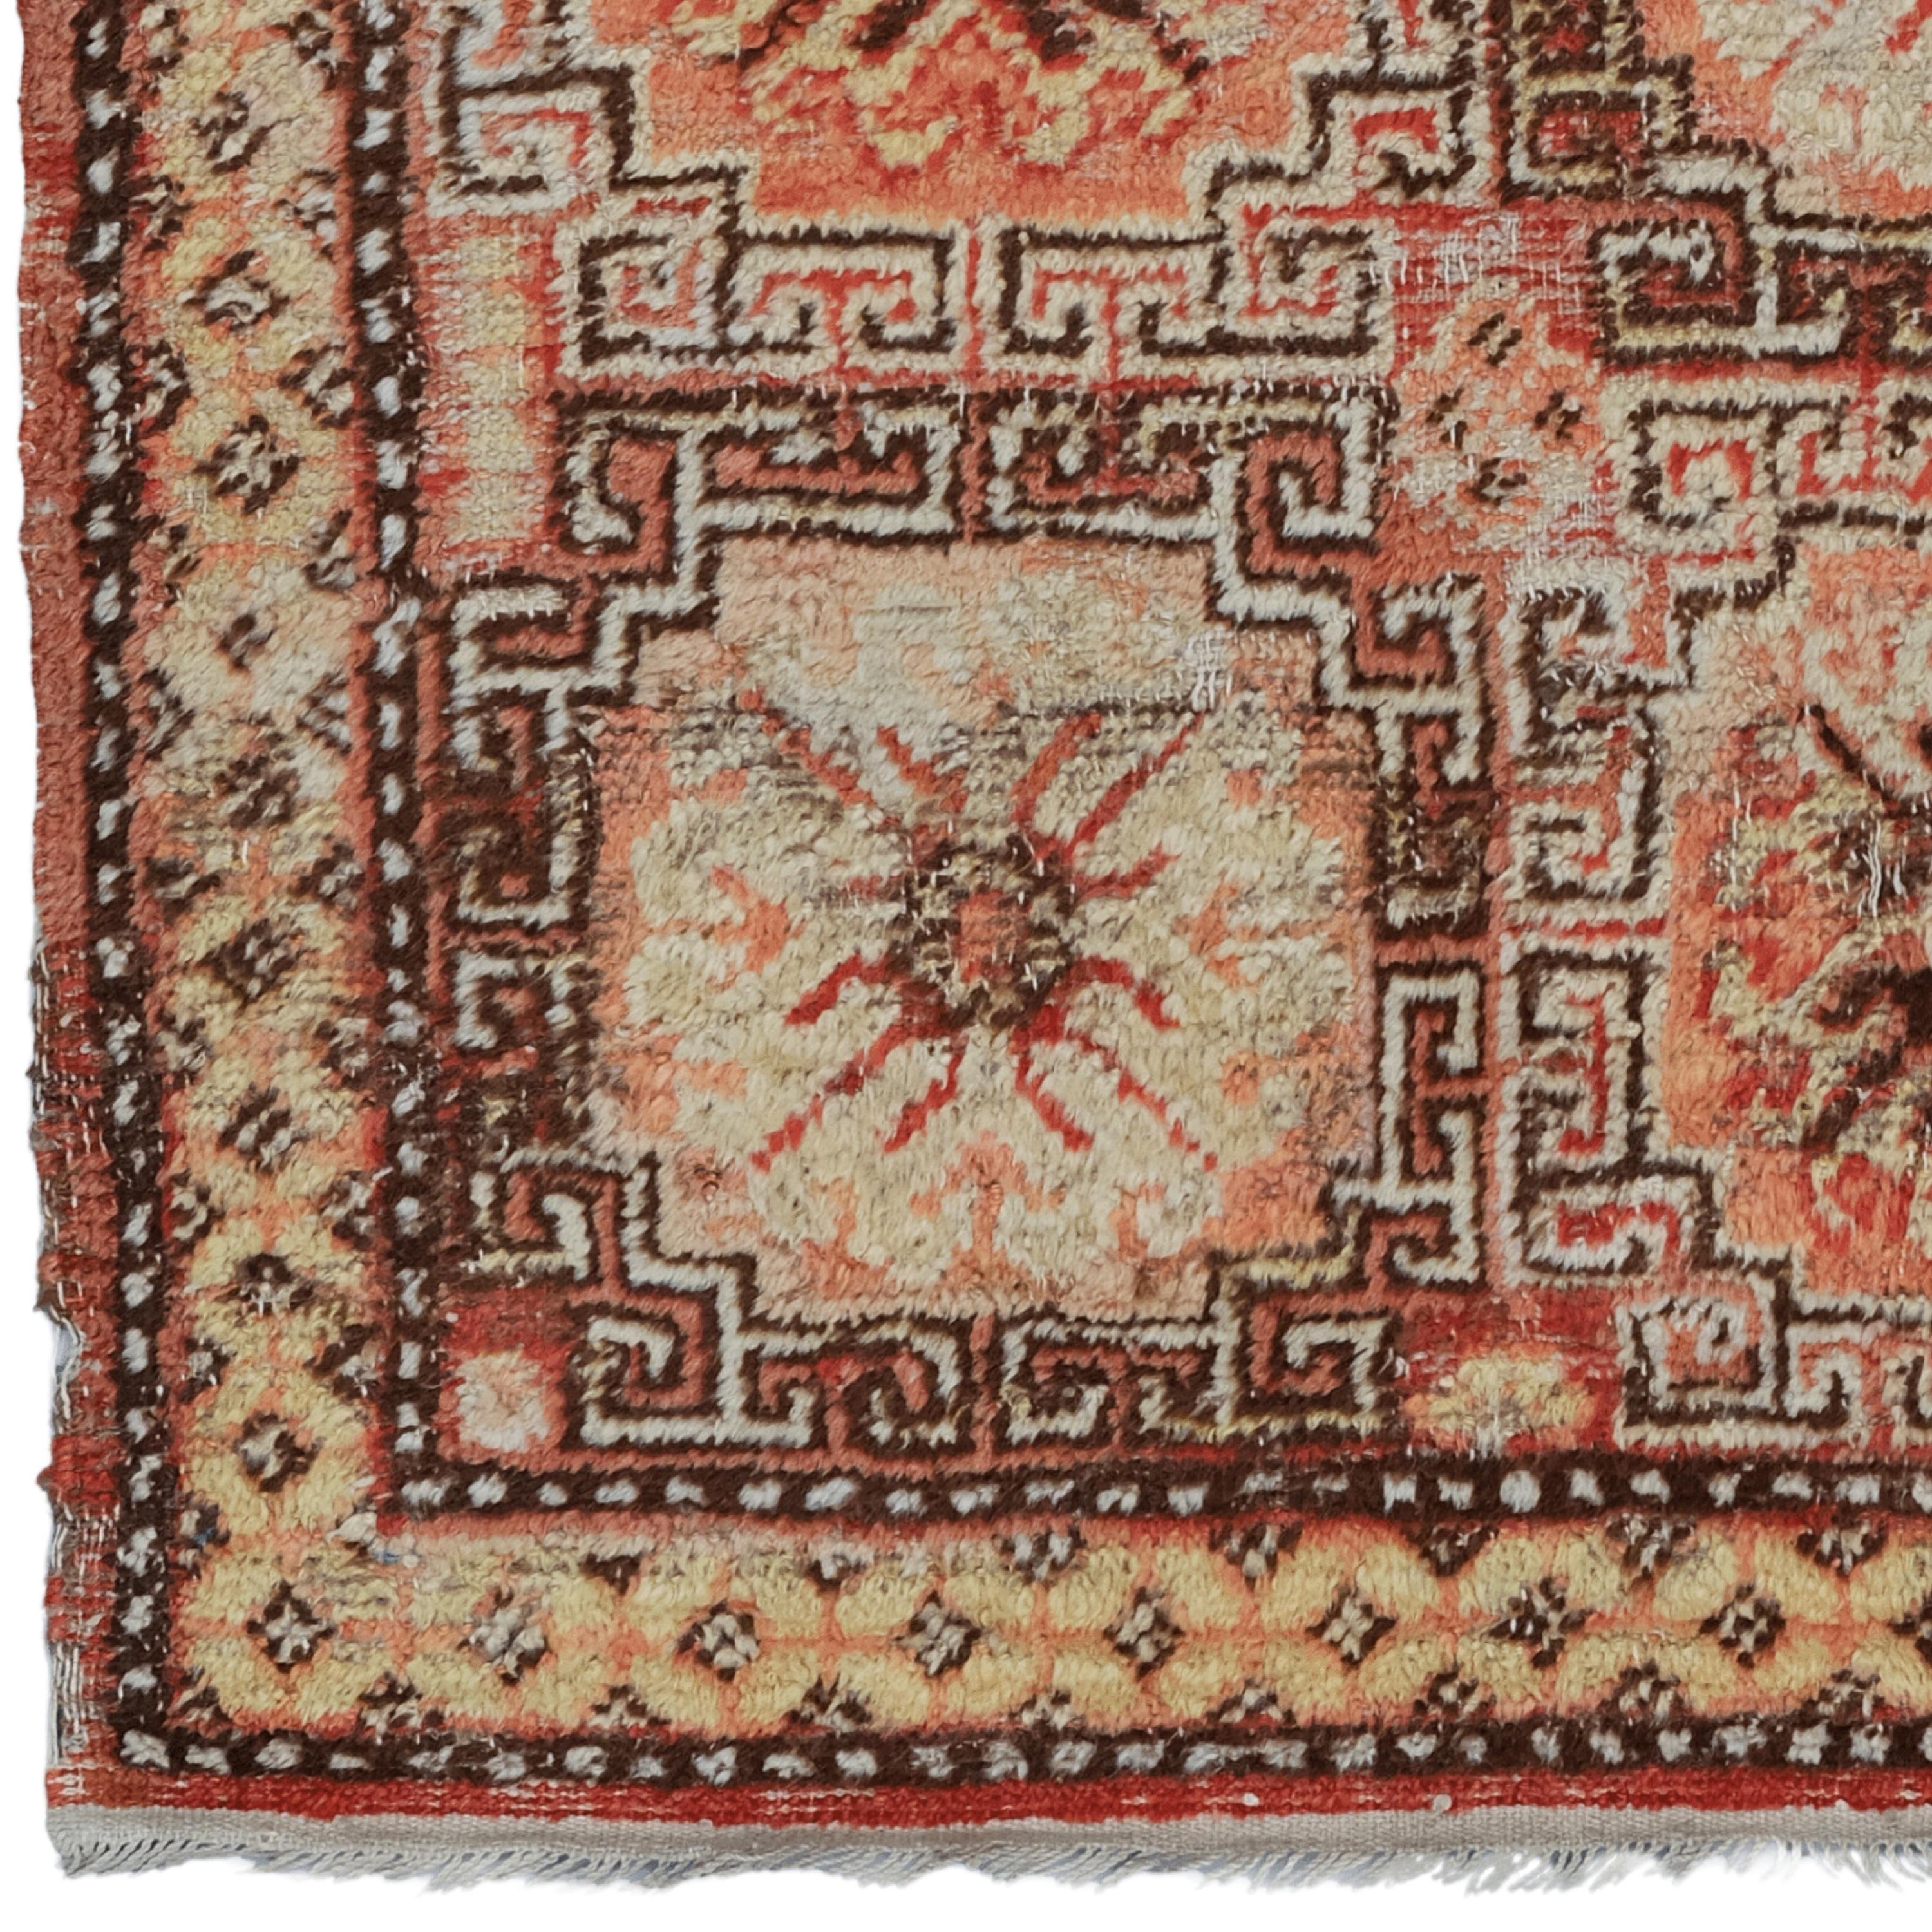 19th Century Khotan Rug - Handwoven Turkish Rug

This elegant 19th-century Khotan rug adds nobility to any space with its historical texture and sophisticated design. This handmade work, measuring 75x100 cm, is designed to maintain its durability